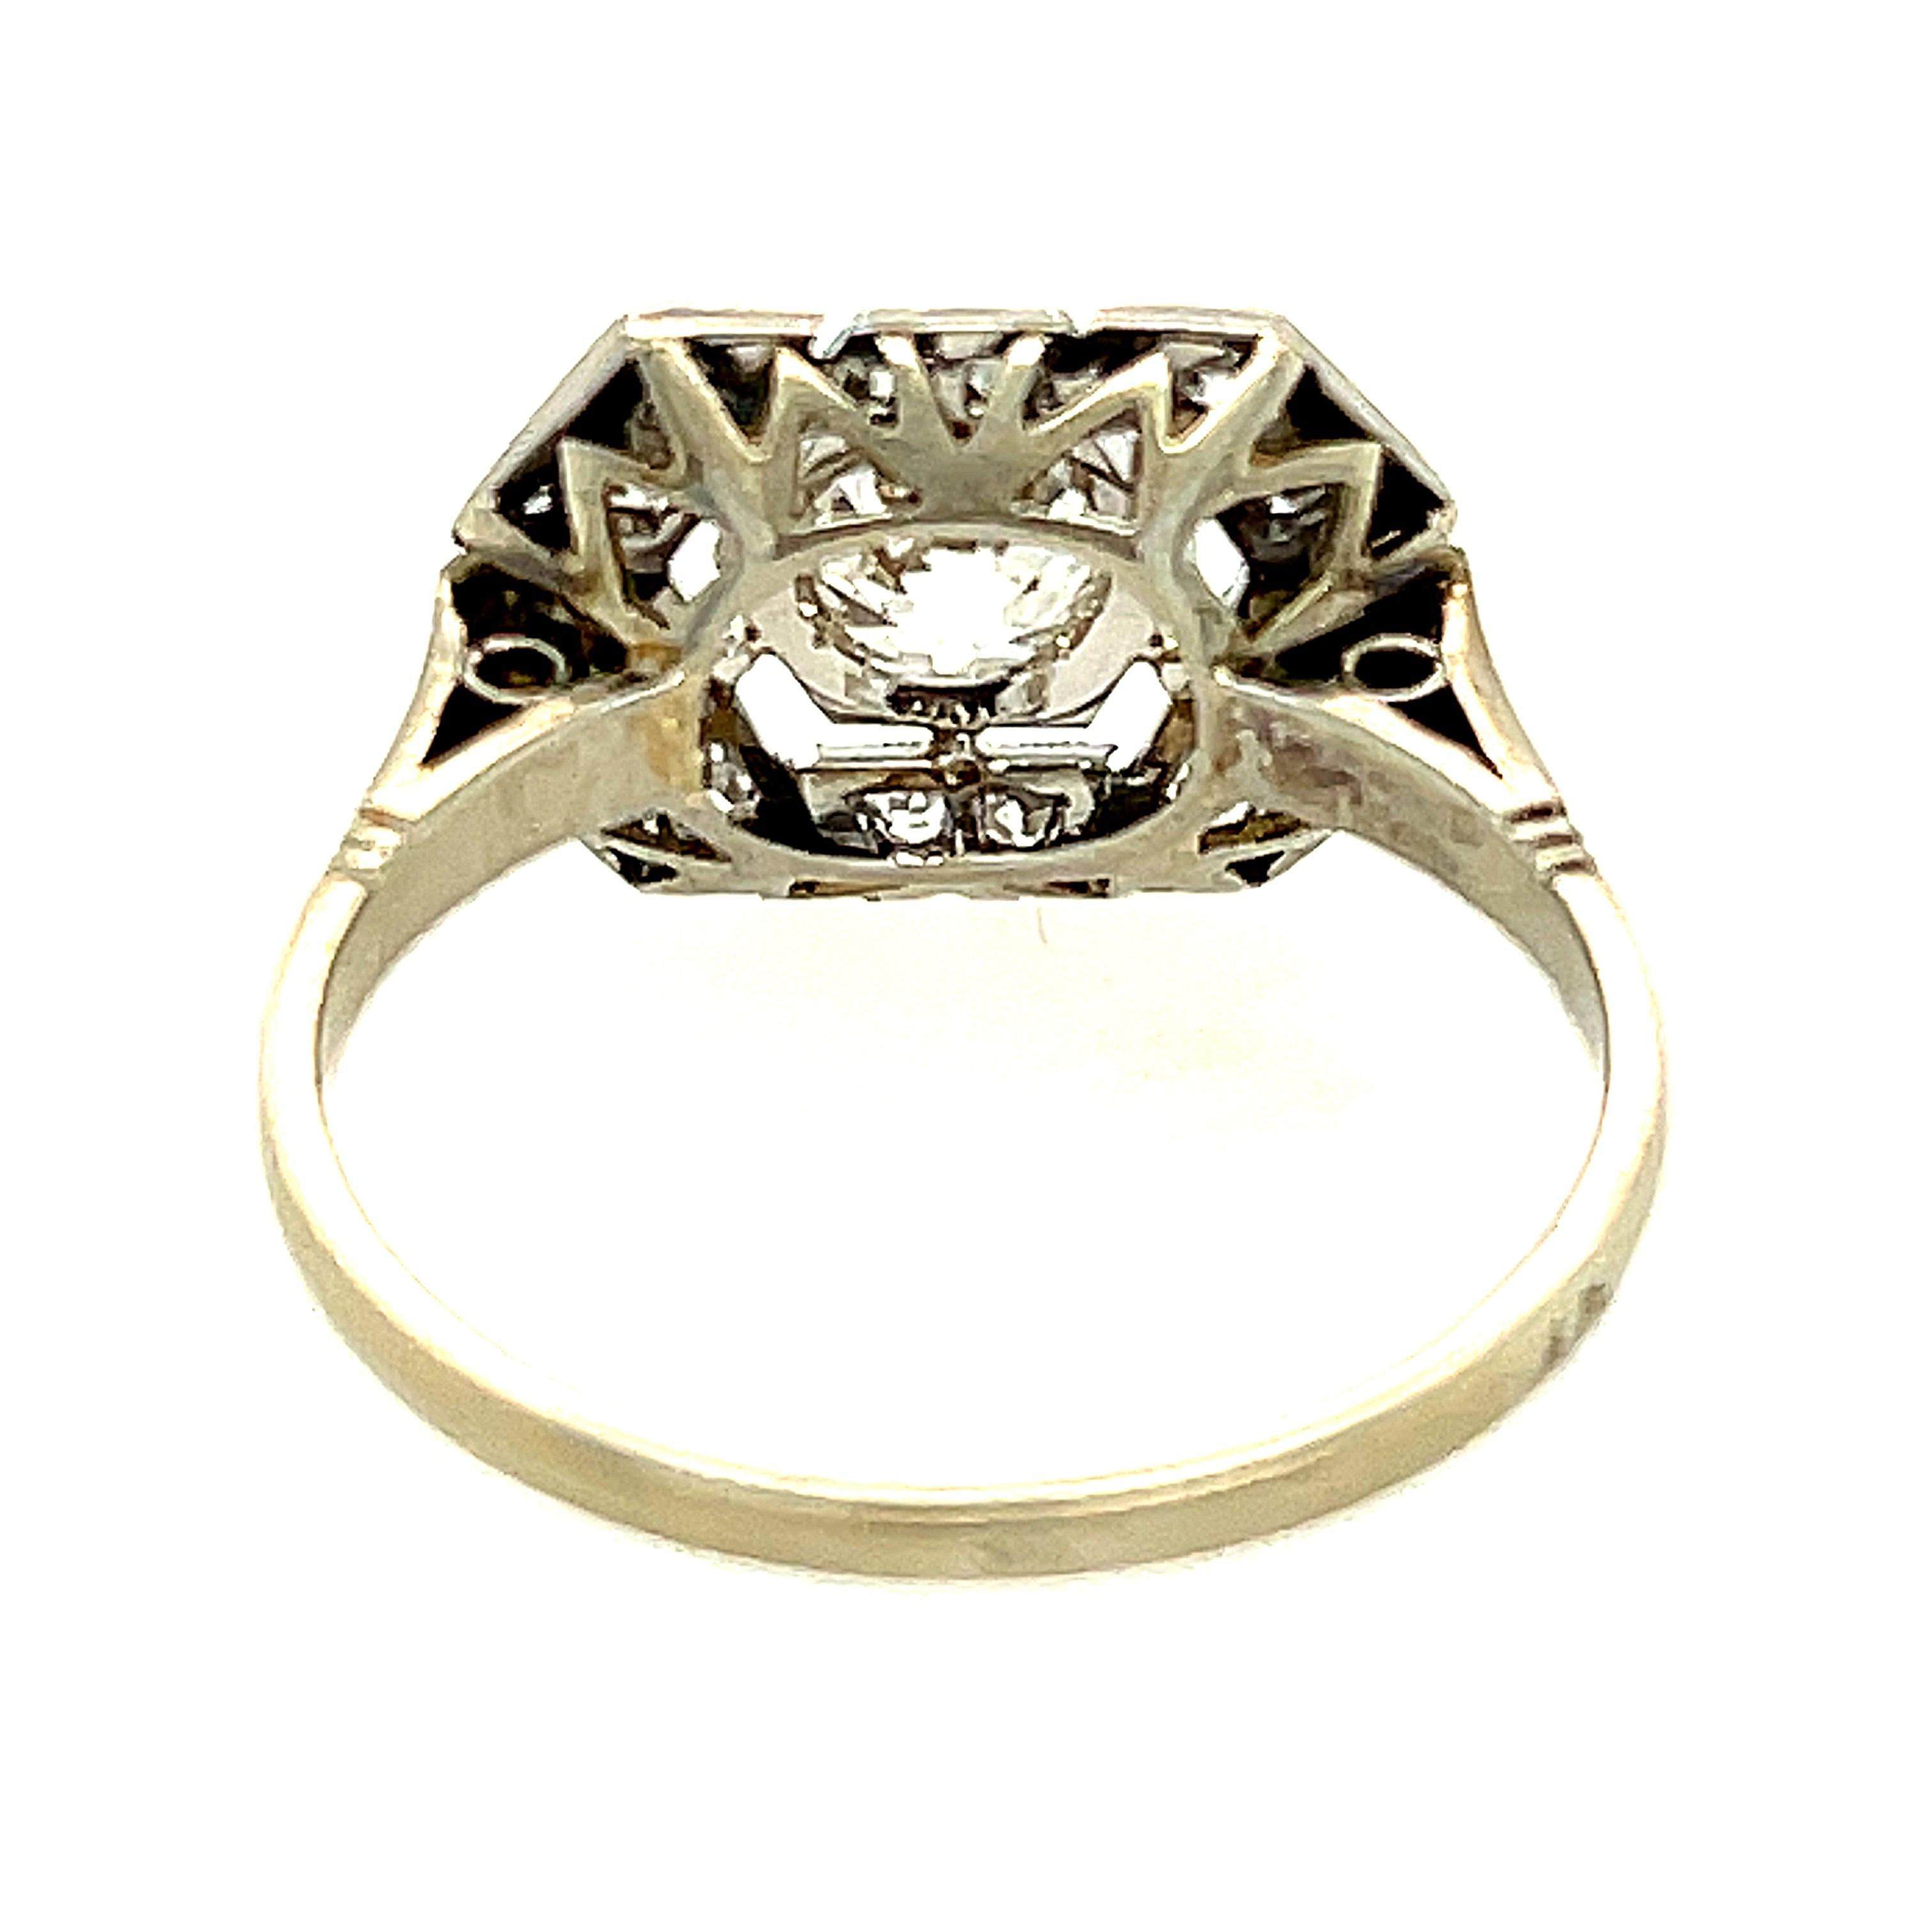 An attractive French platinum Art Deco diamond ring centering upon an Old European cut diamond weighing approximately 0.55 carats. The panel ring is set with 18 single cut diamonds weighing about 0.25 carats total. The center diamond is a nice white